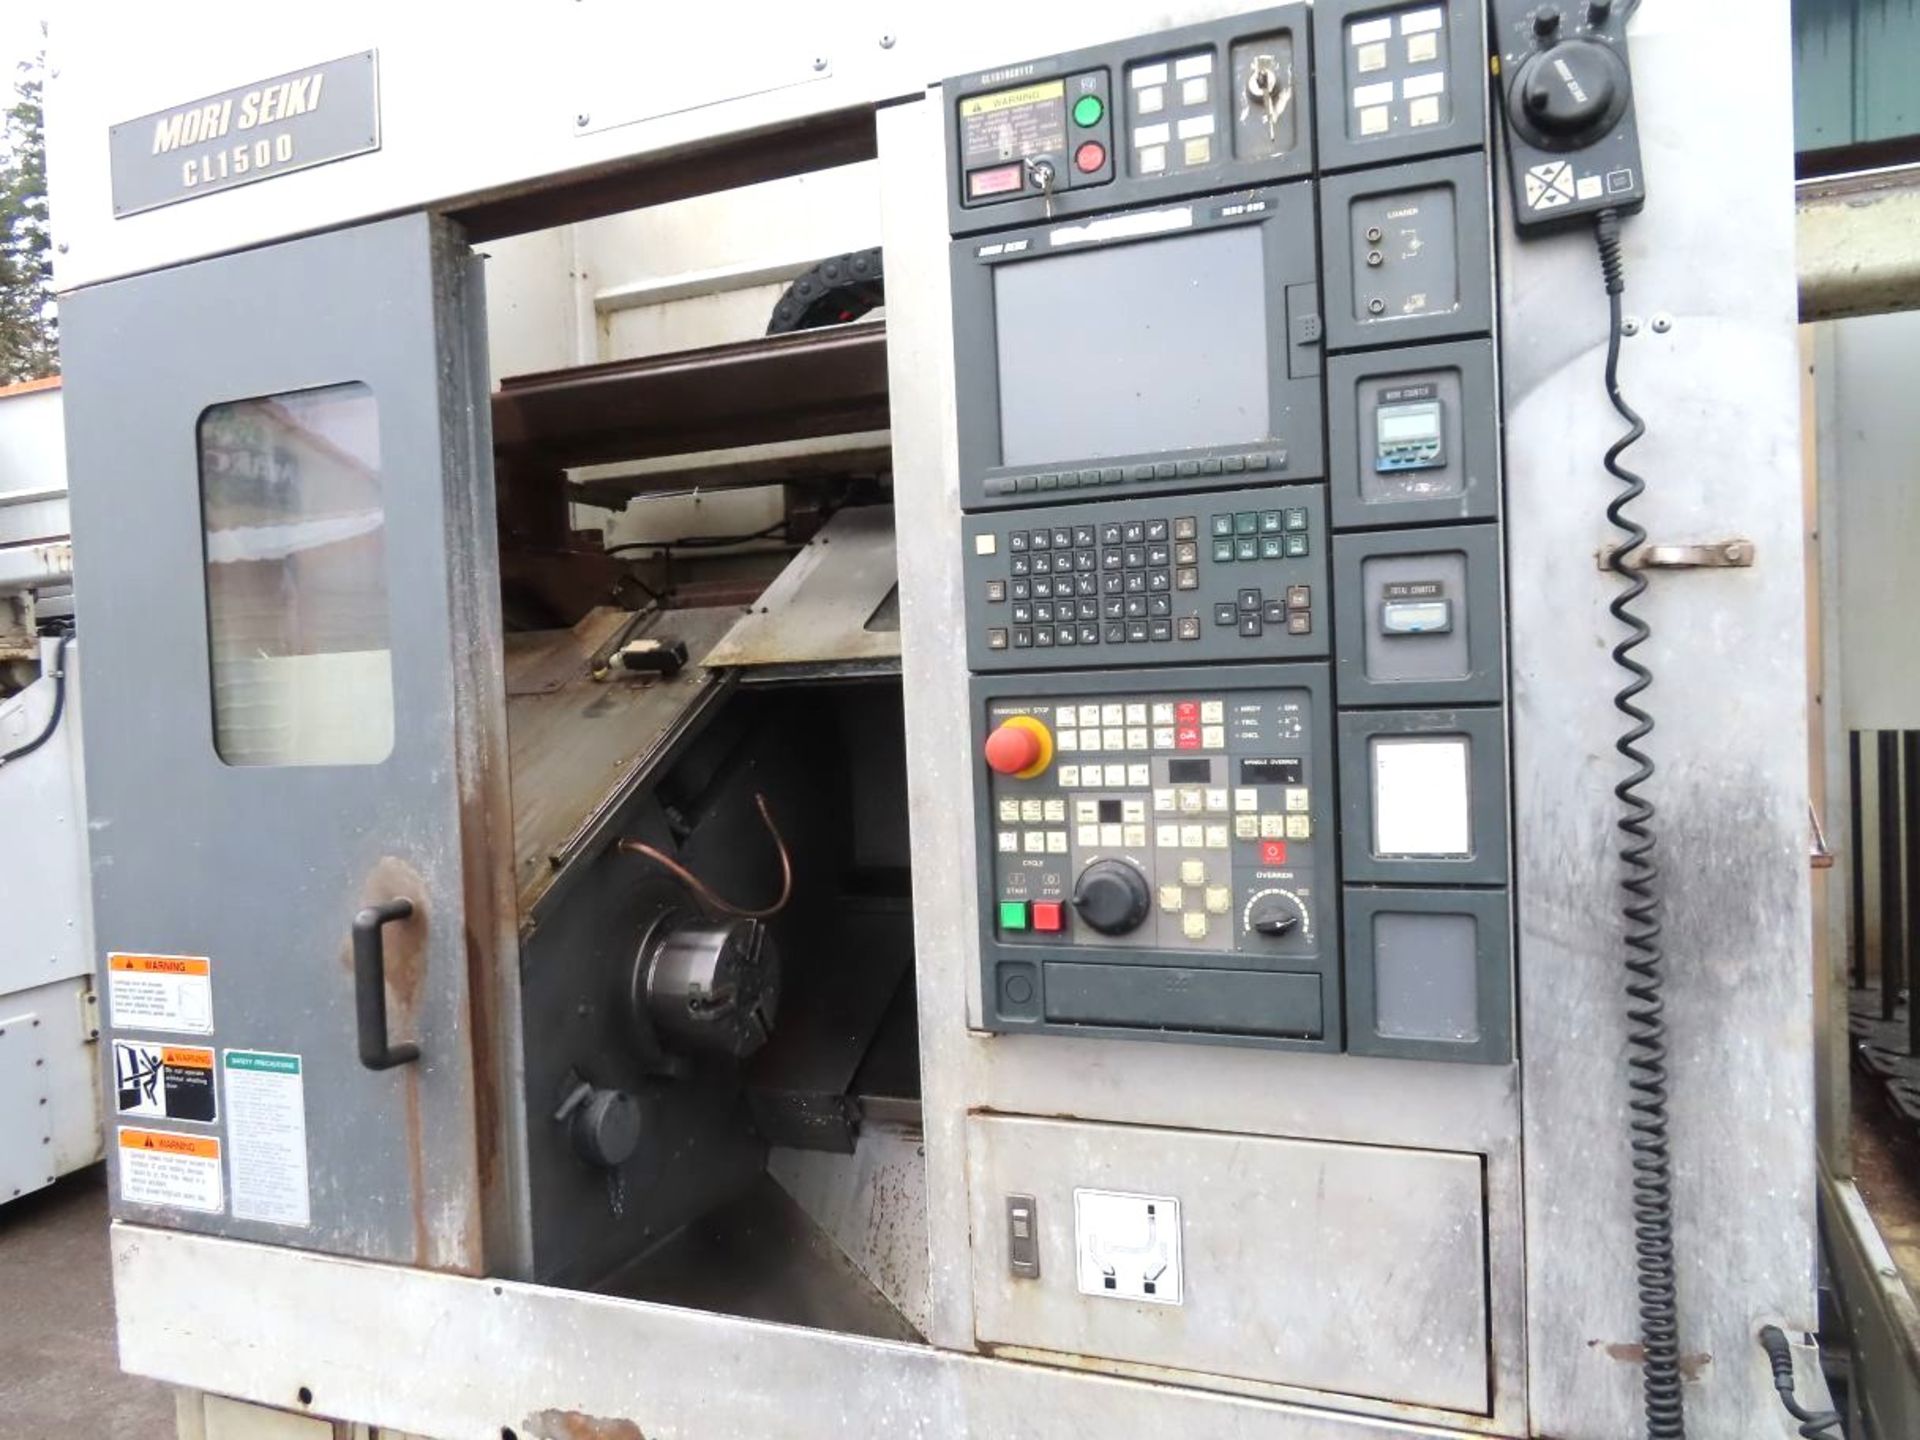 Mori Seiki CL-1500 CNC Chucking Lathe with Robotic Load/unloader and Parts Stocker New 2002, - Image 15 of 21